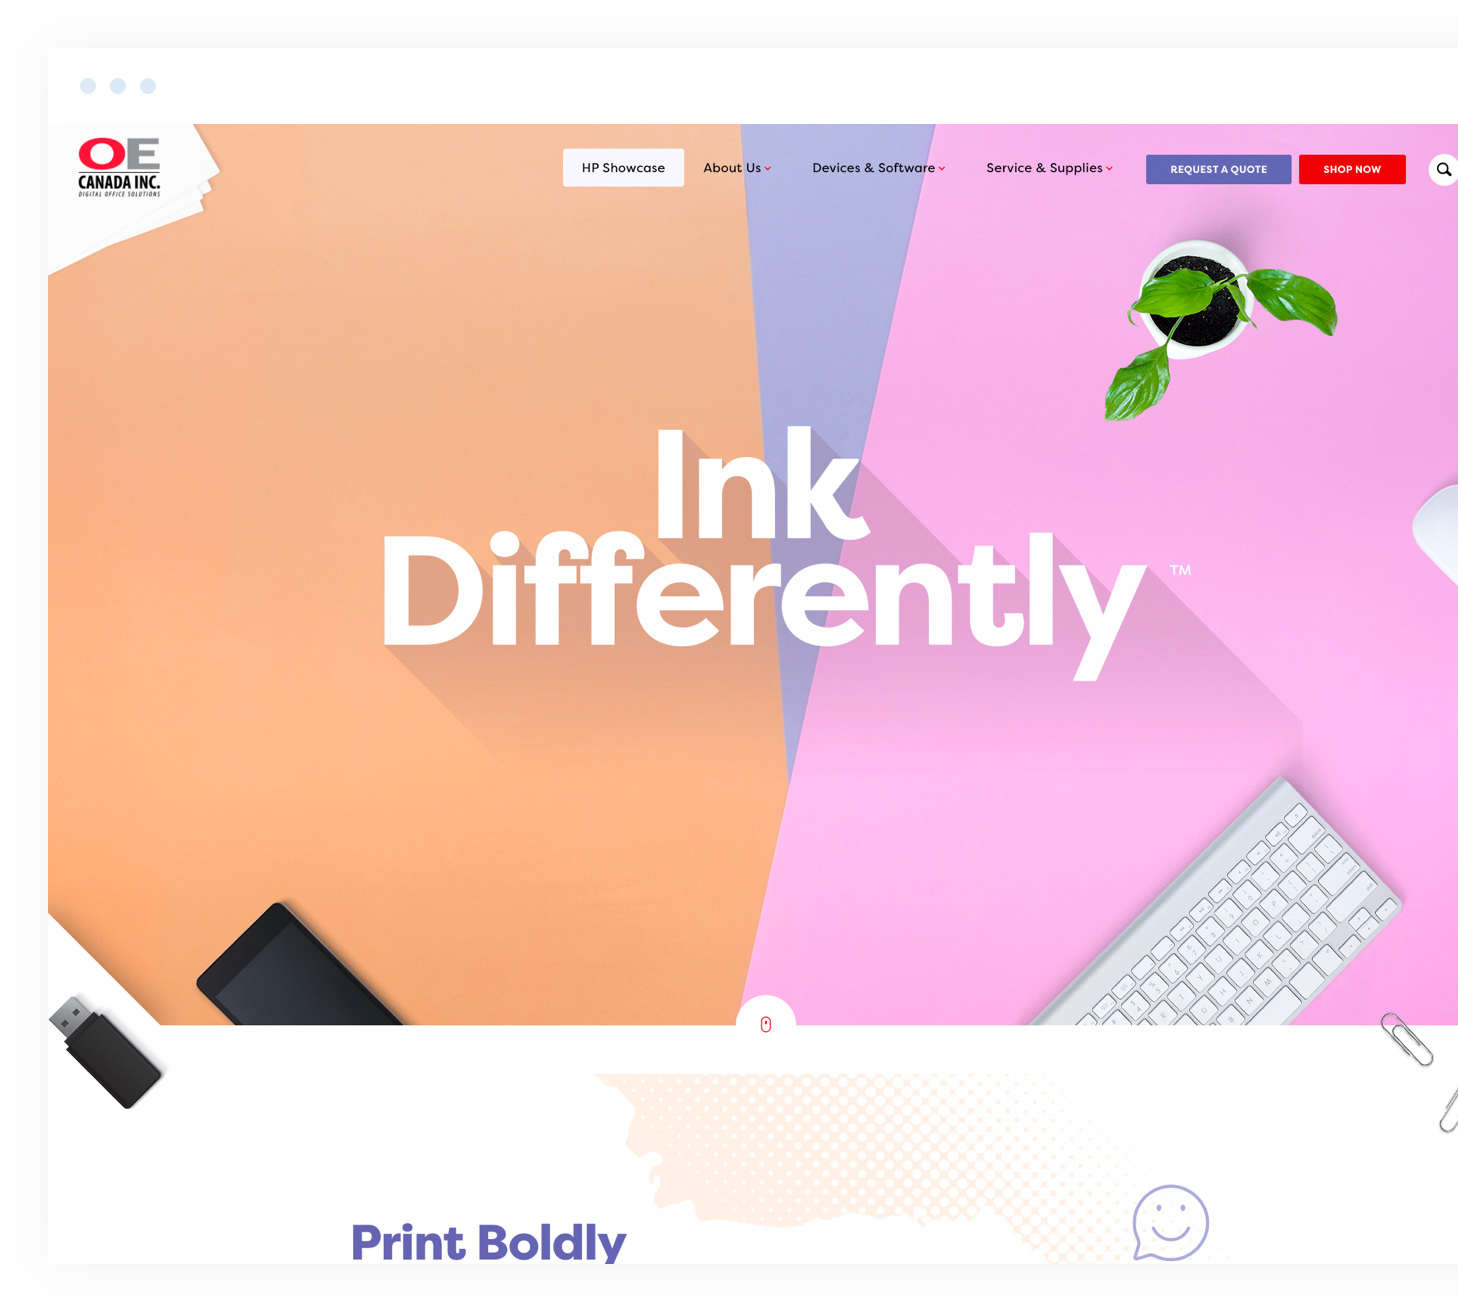 Ink differently website layout